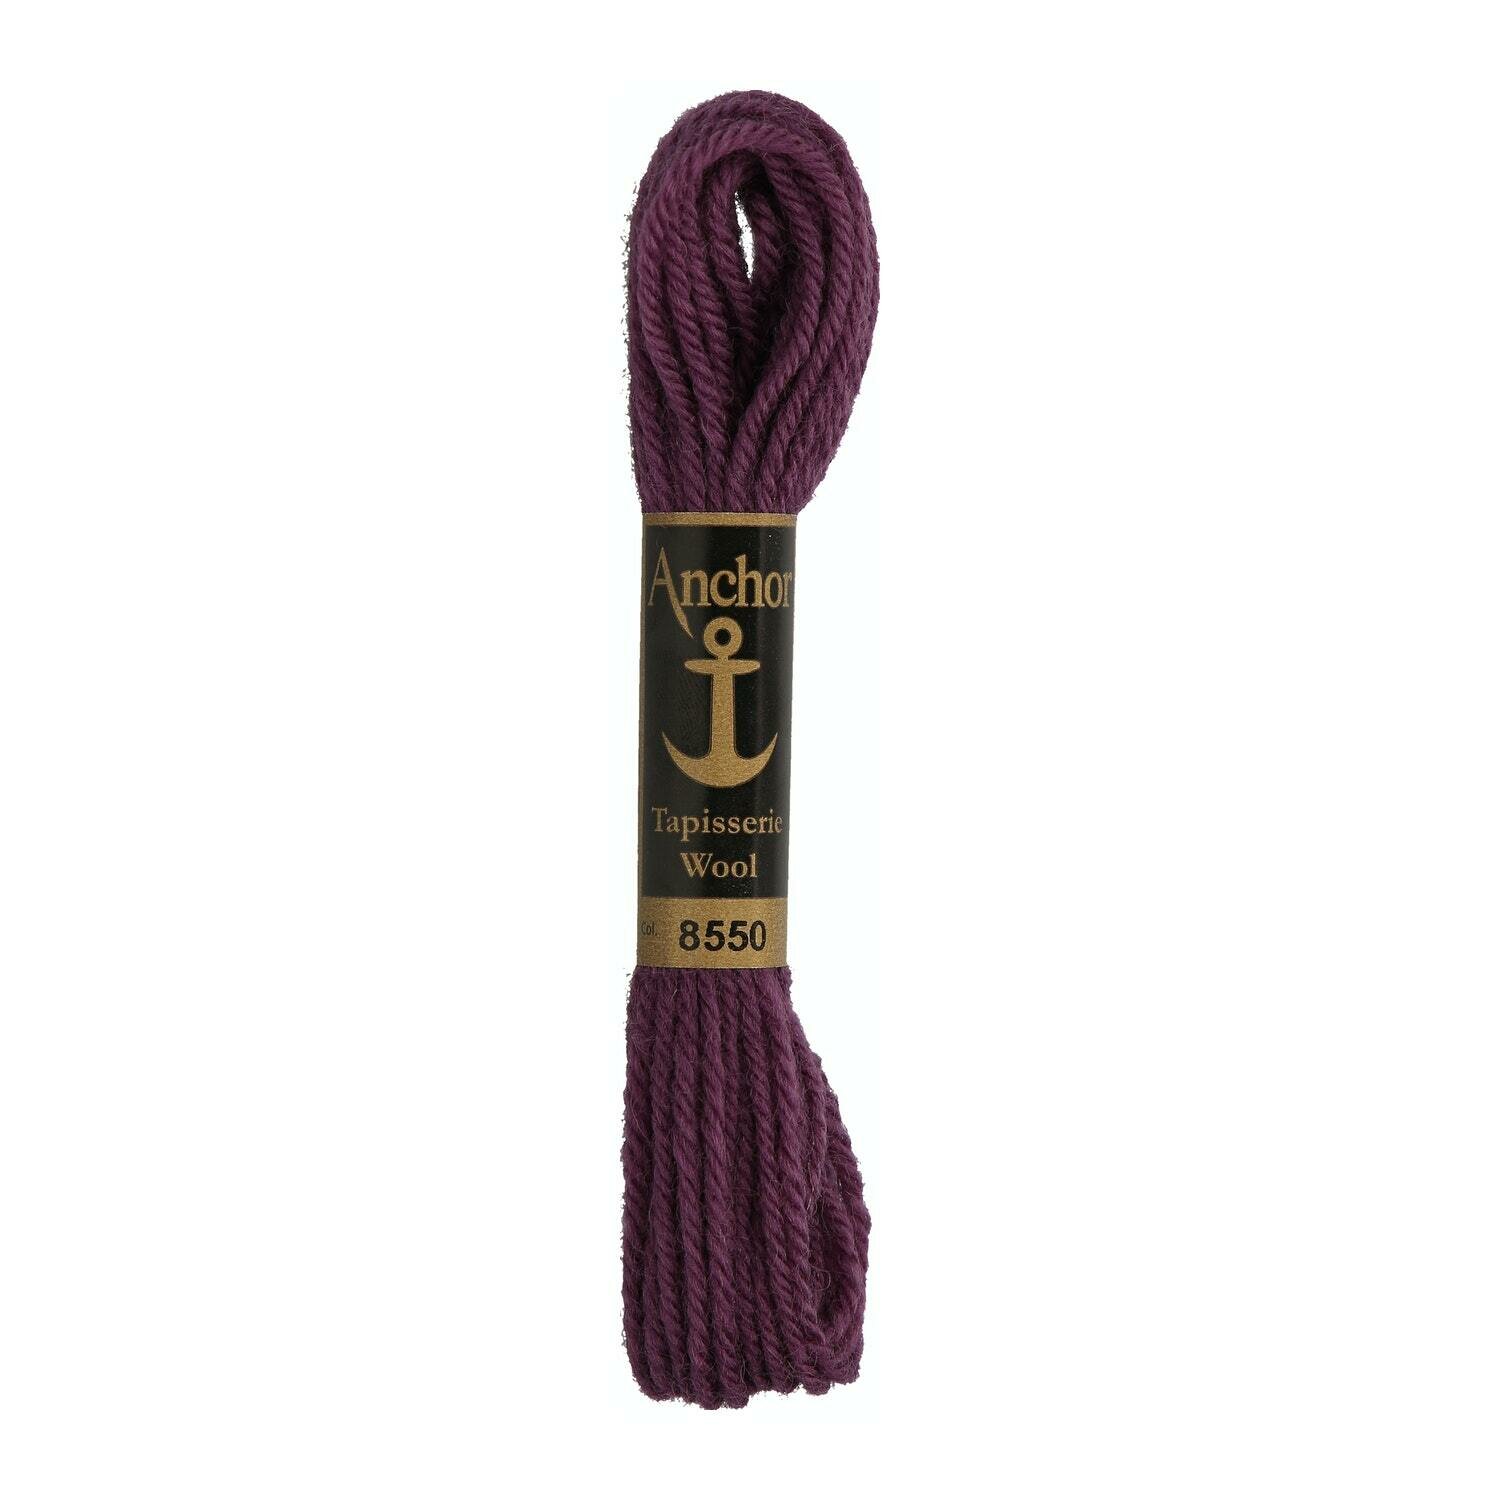 Anchor Tapisserie Wool # 08550